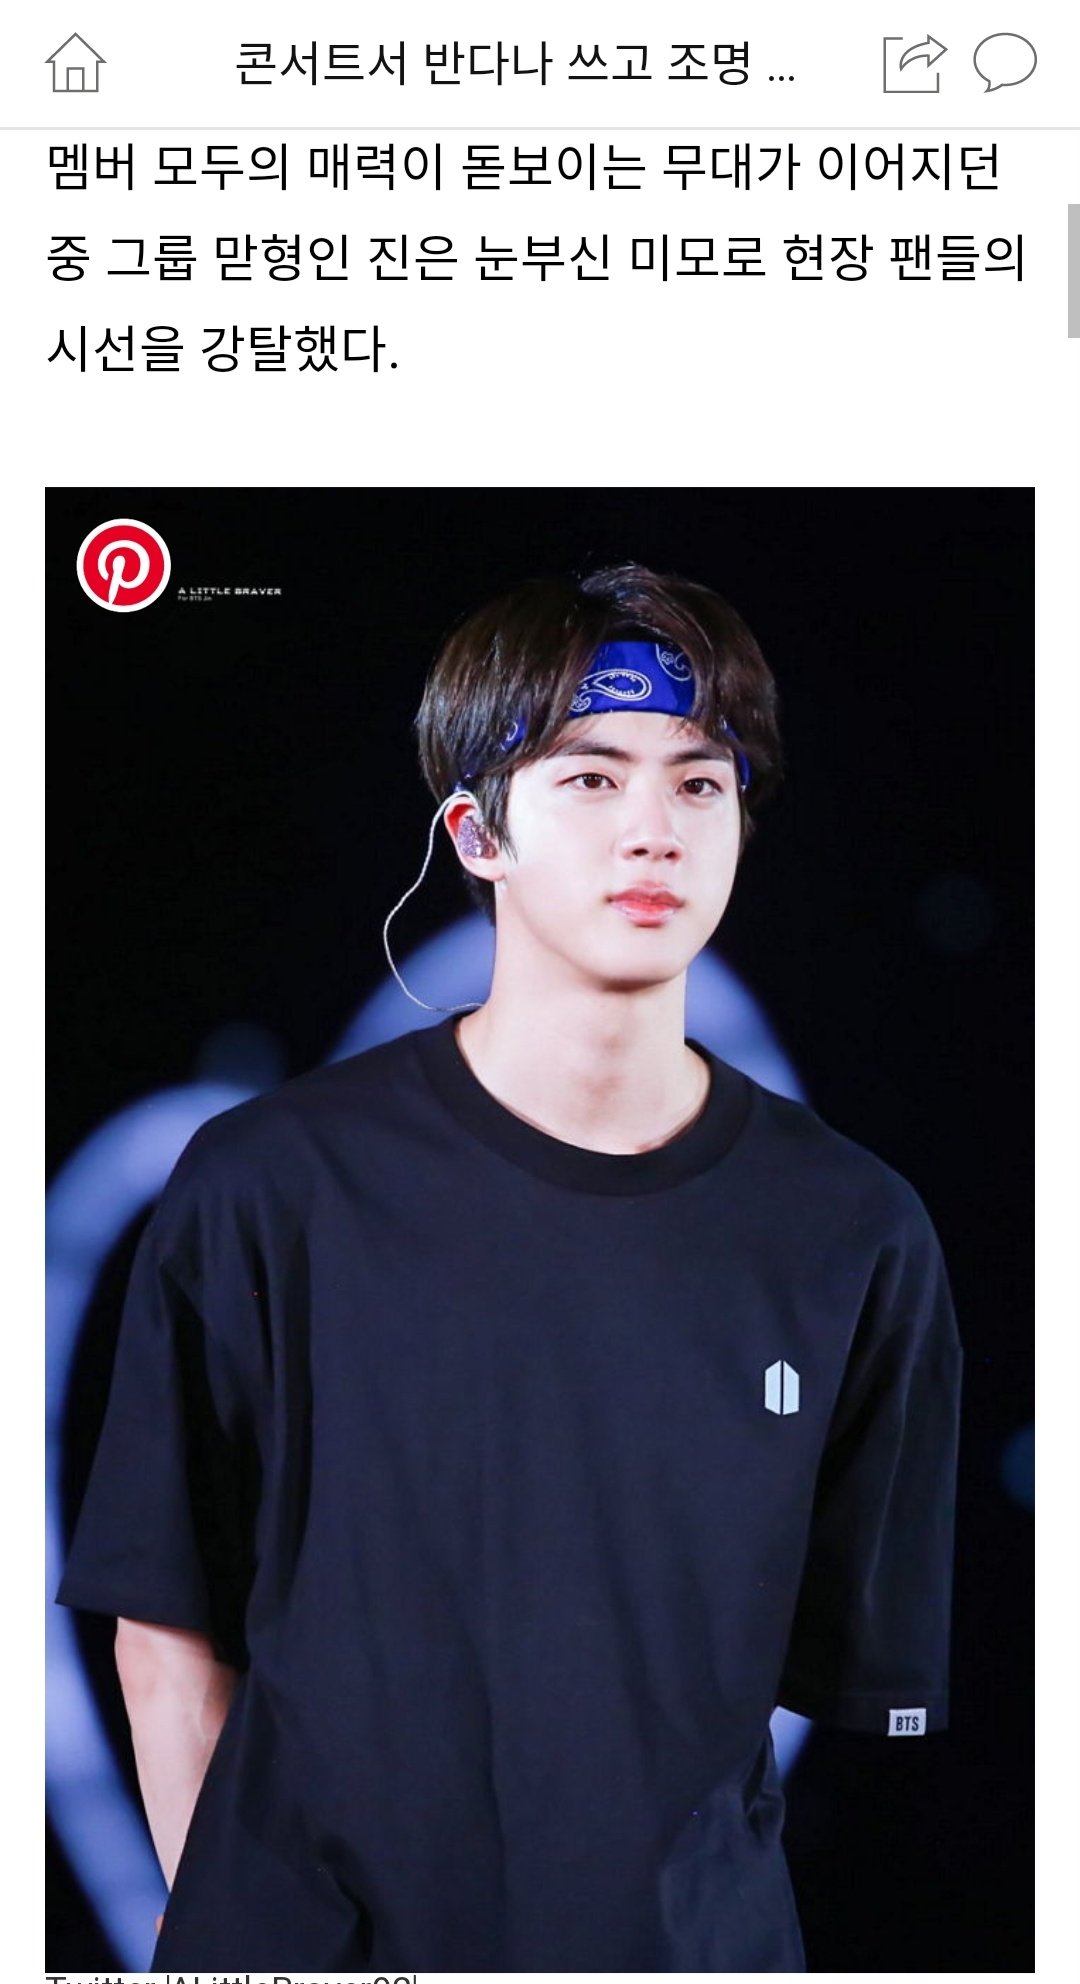 All for Jin on X: [#JinUpdate] KMedia said BTS Jin showed his